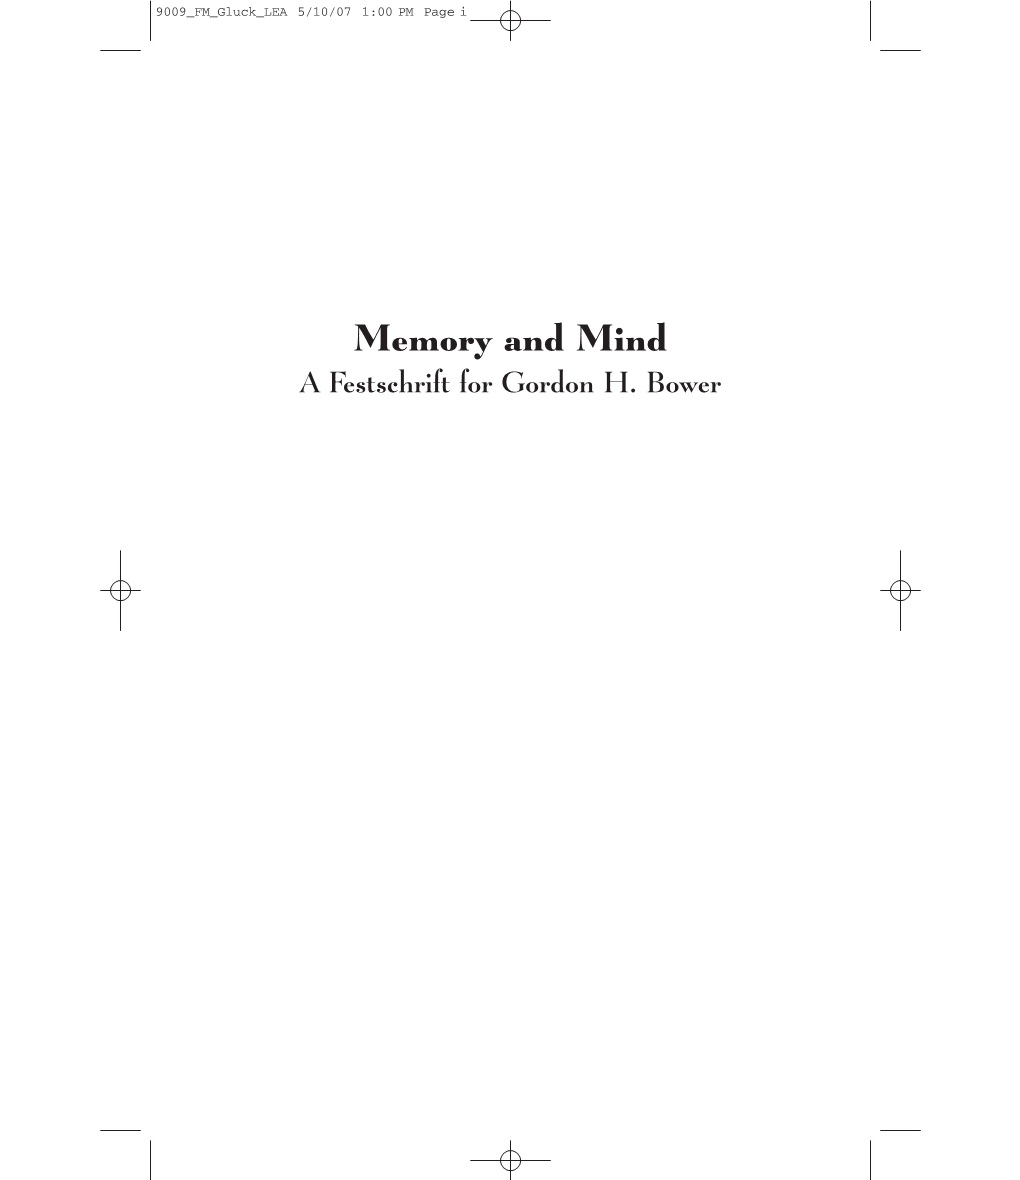 Memory and Mind: a Festschrift for Gordon H. Bower